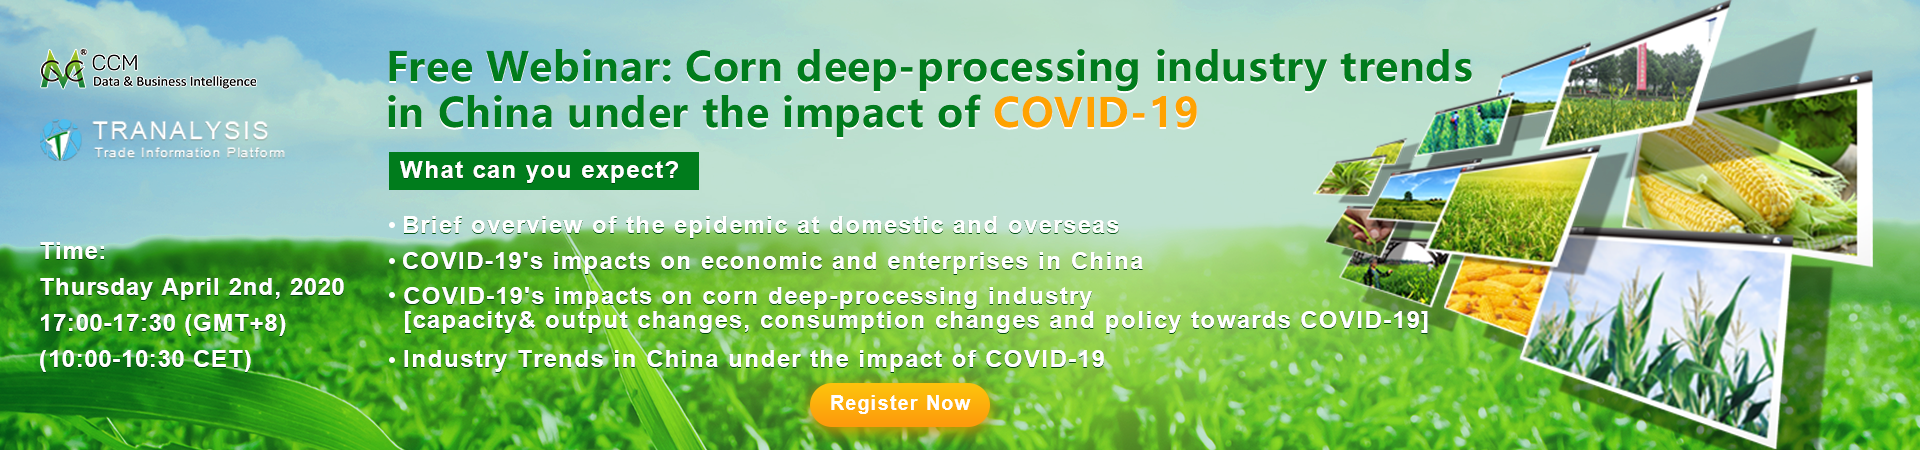 Experts' review on the corn industry in China under the impact of COVID_19